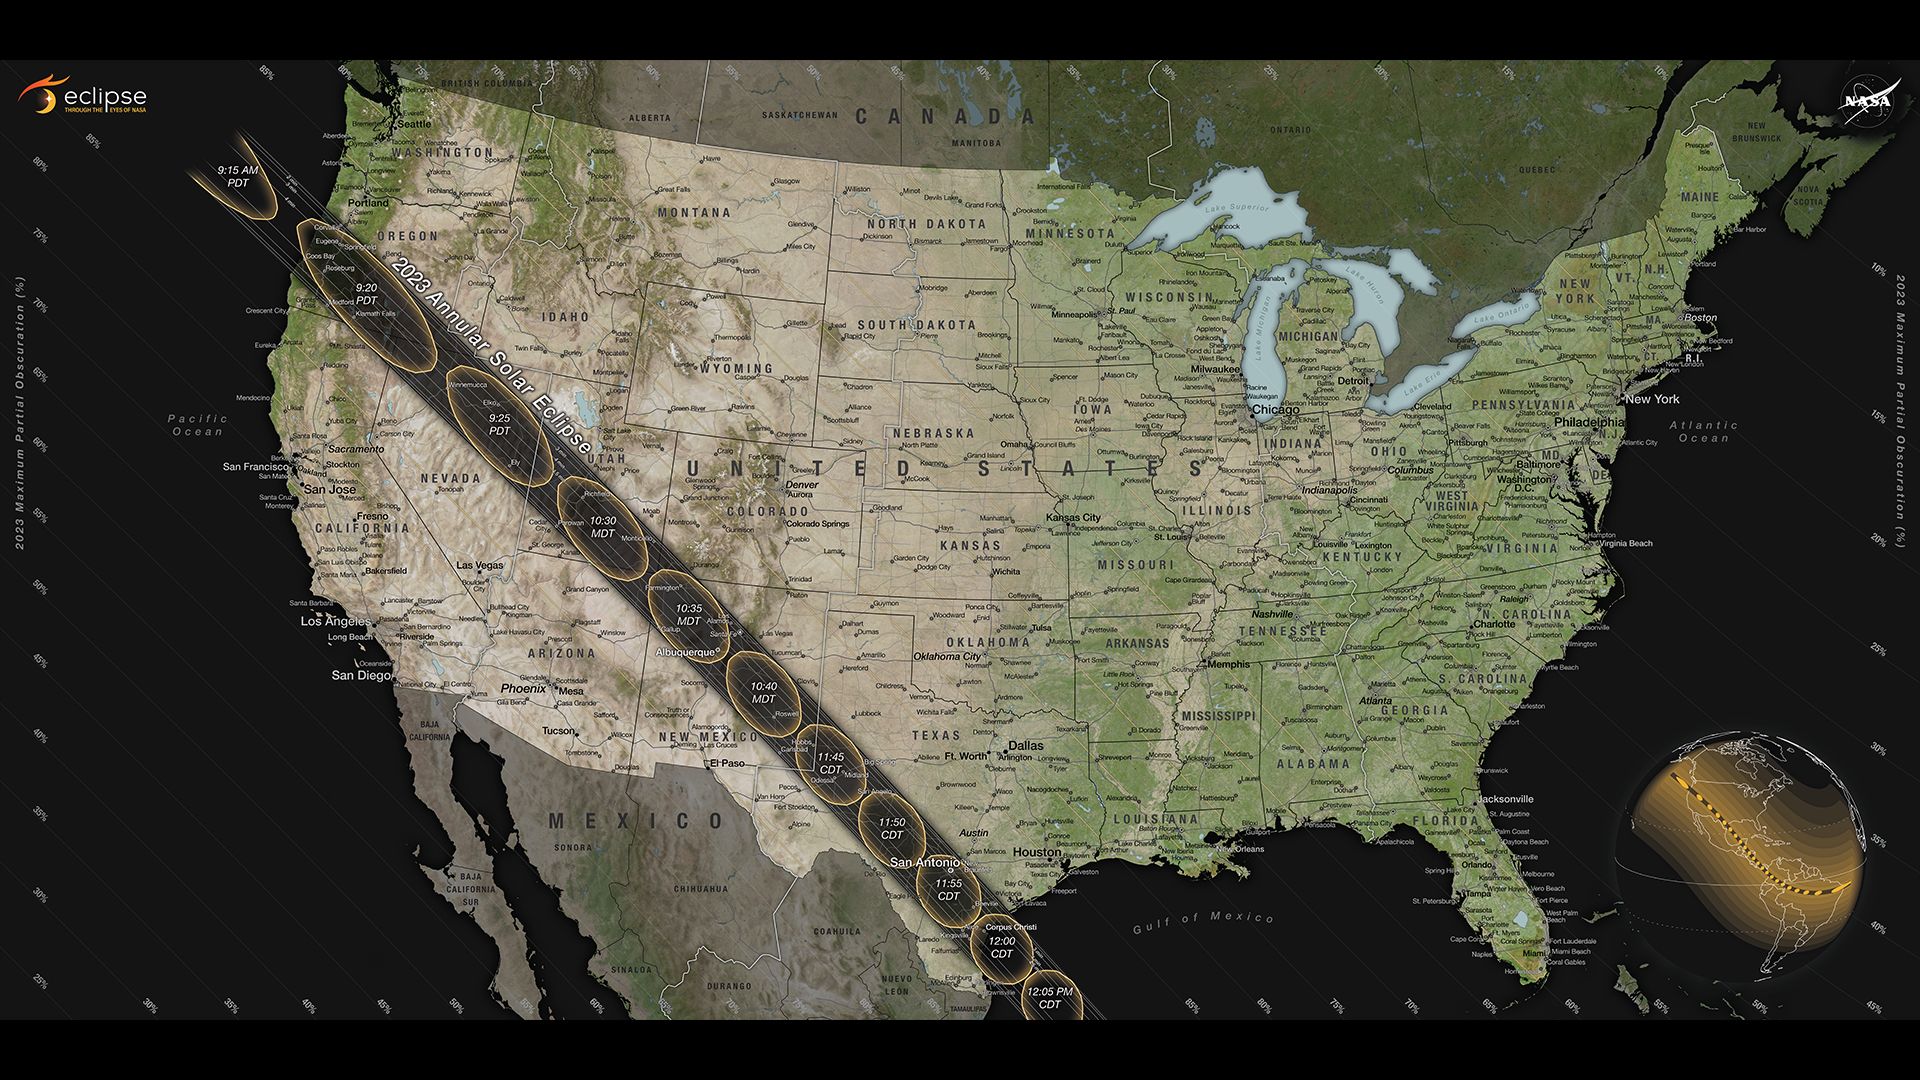 Eclipse map showing where the annular solar eclipse of October 2023 will be visible.